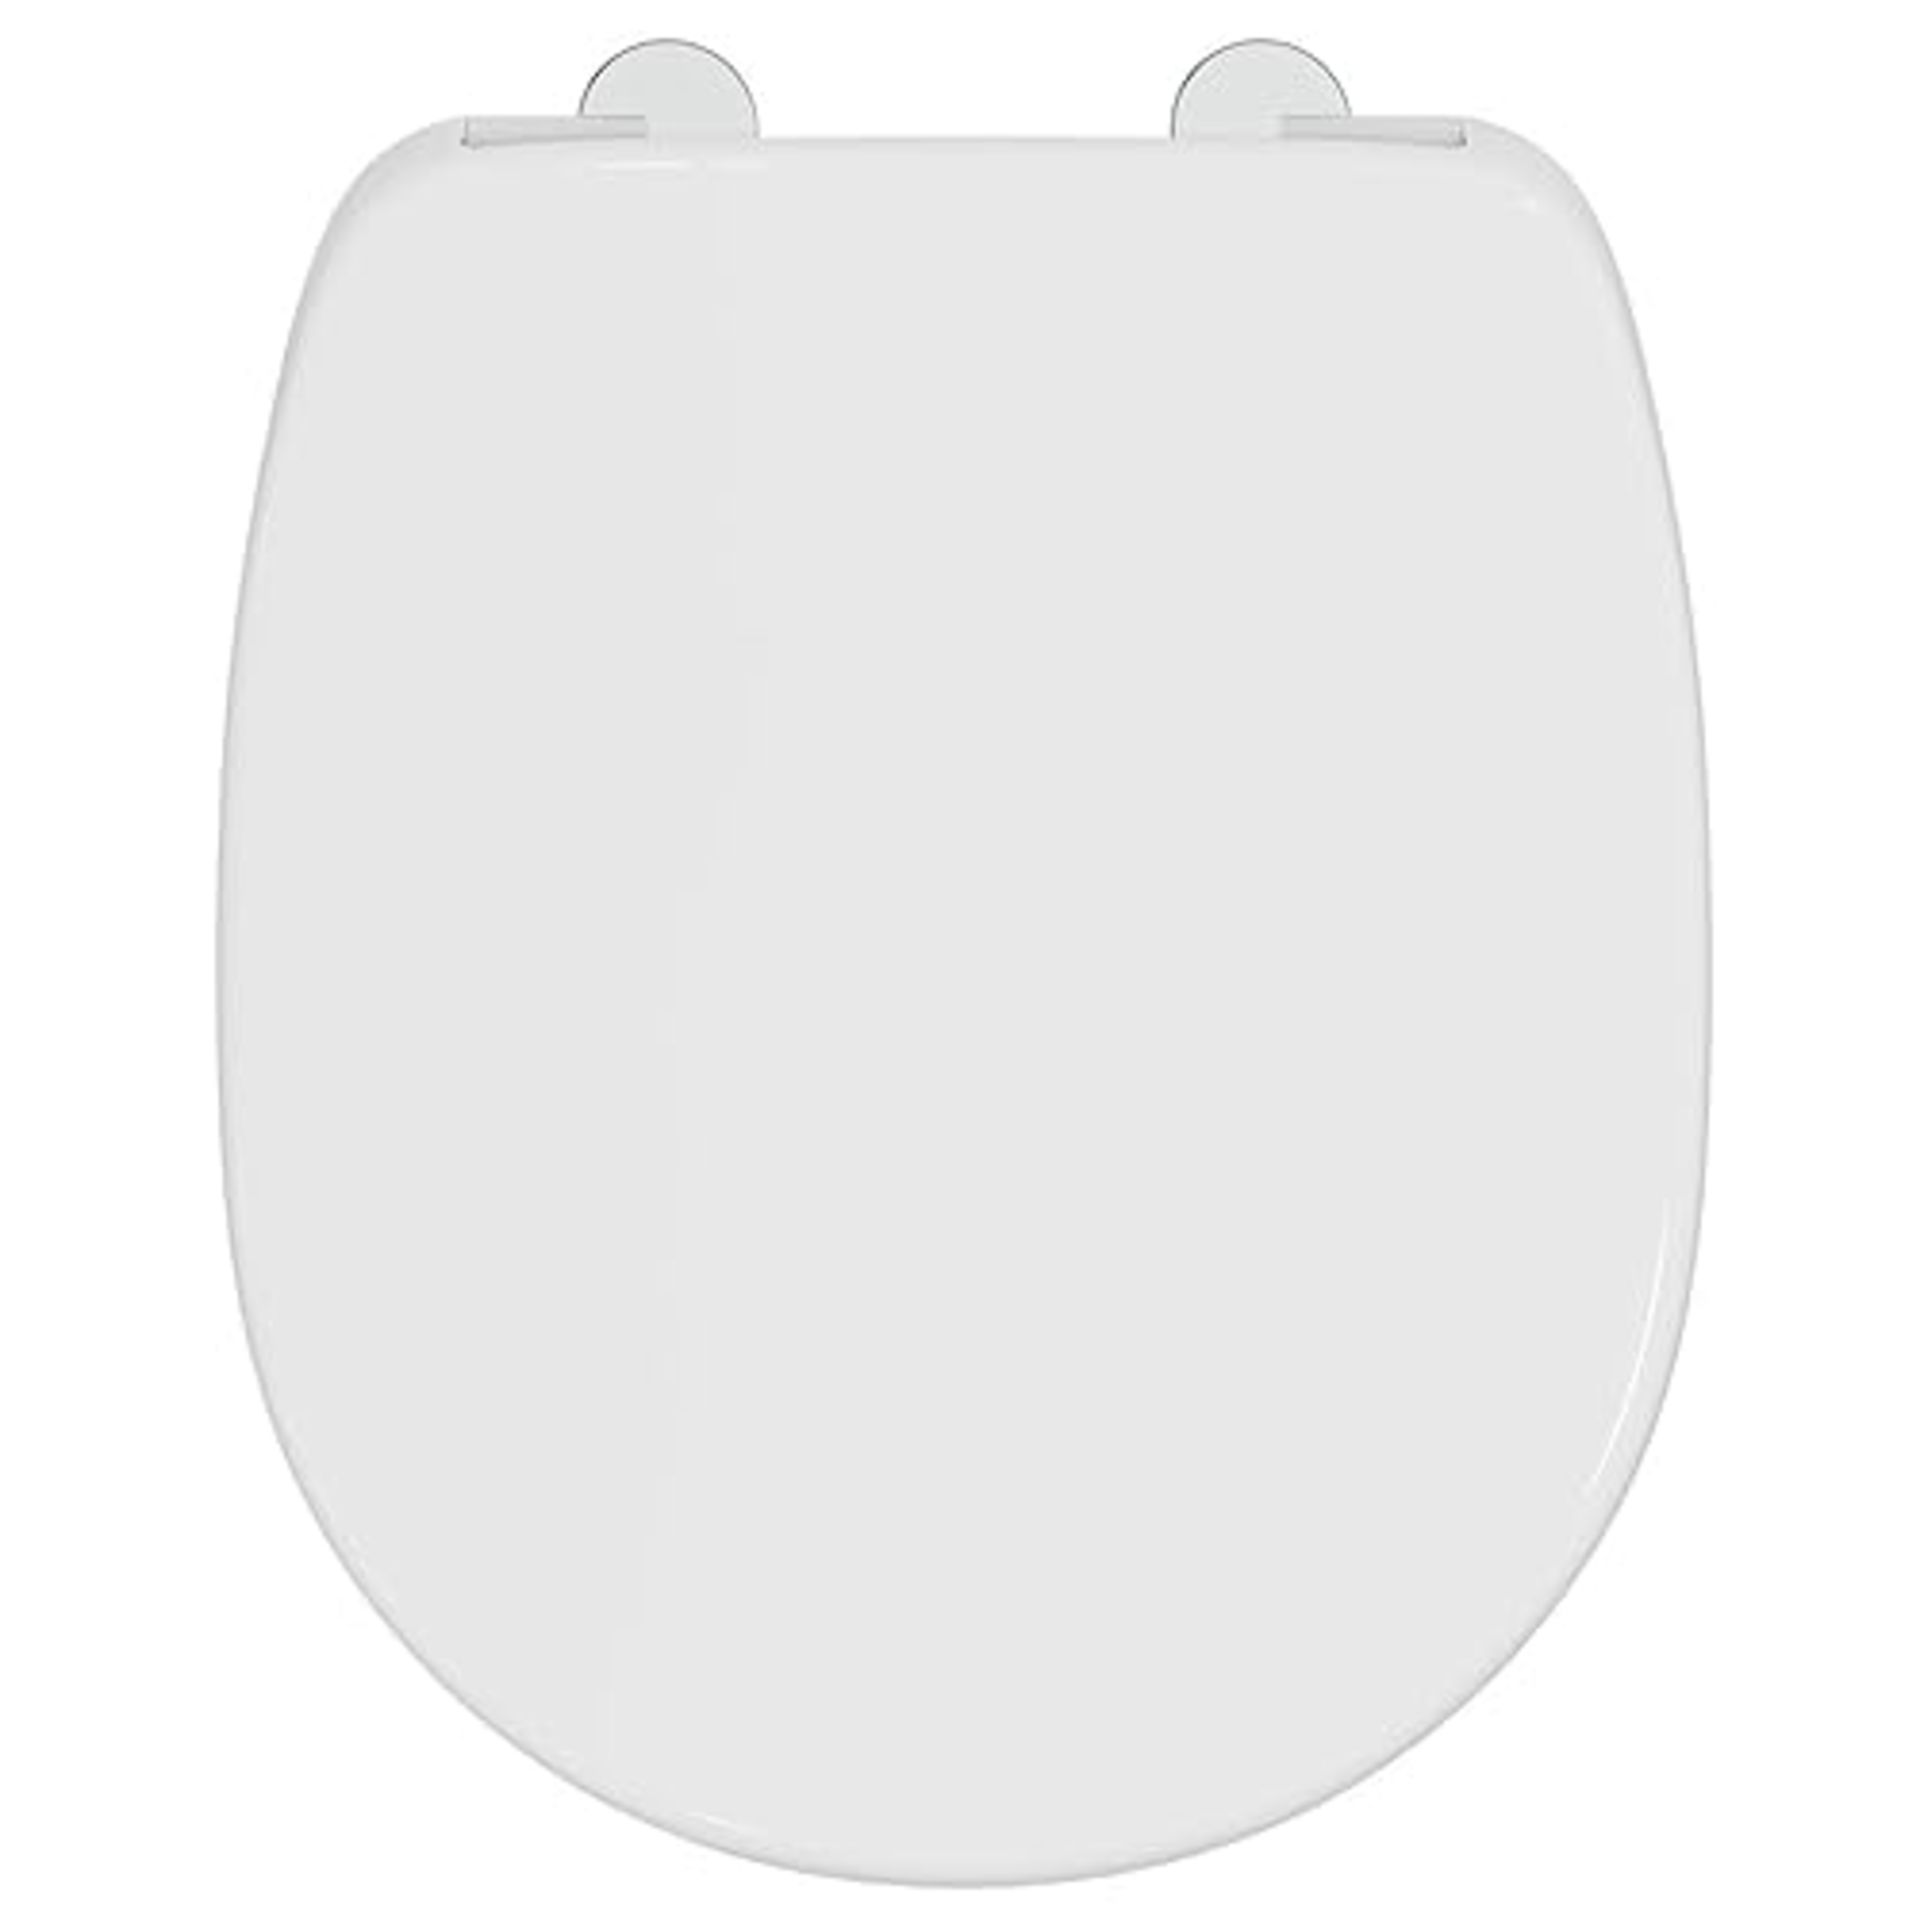 Ideal Standard Concept Soft Close Toilet Seat White